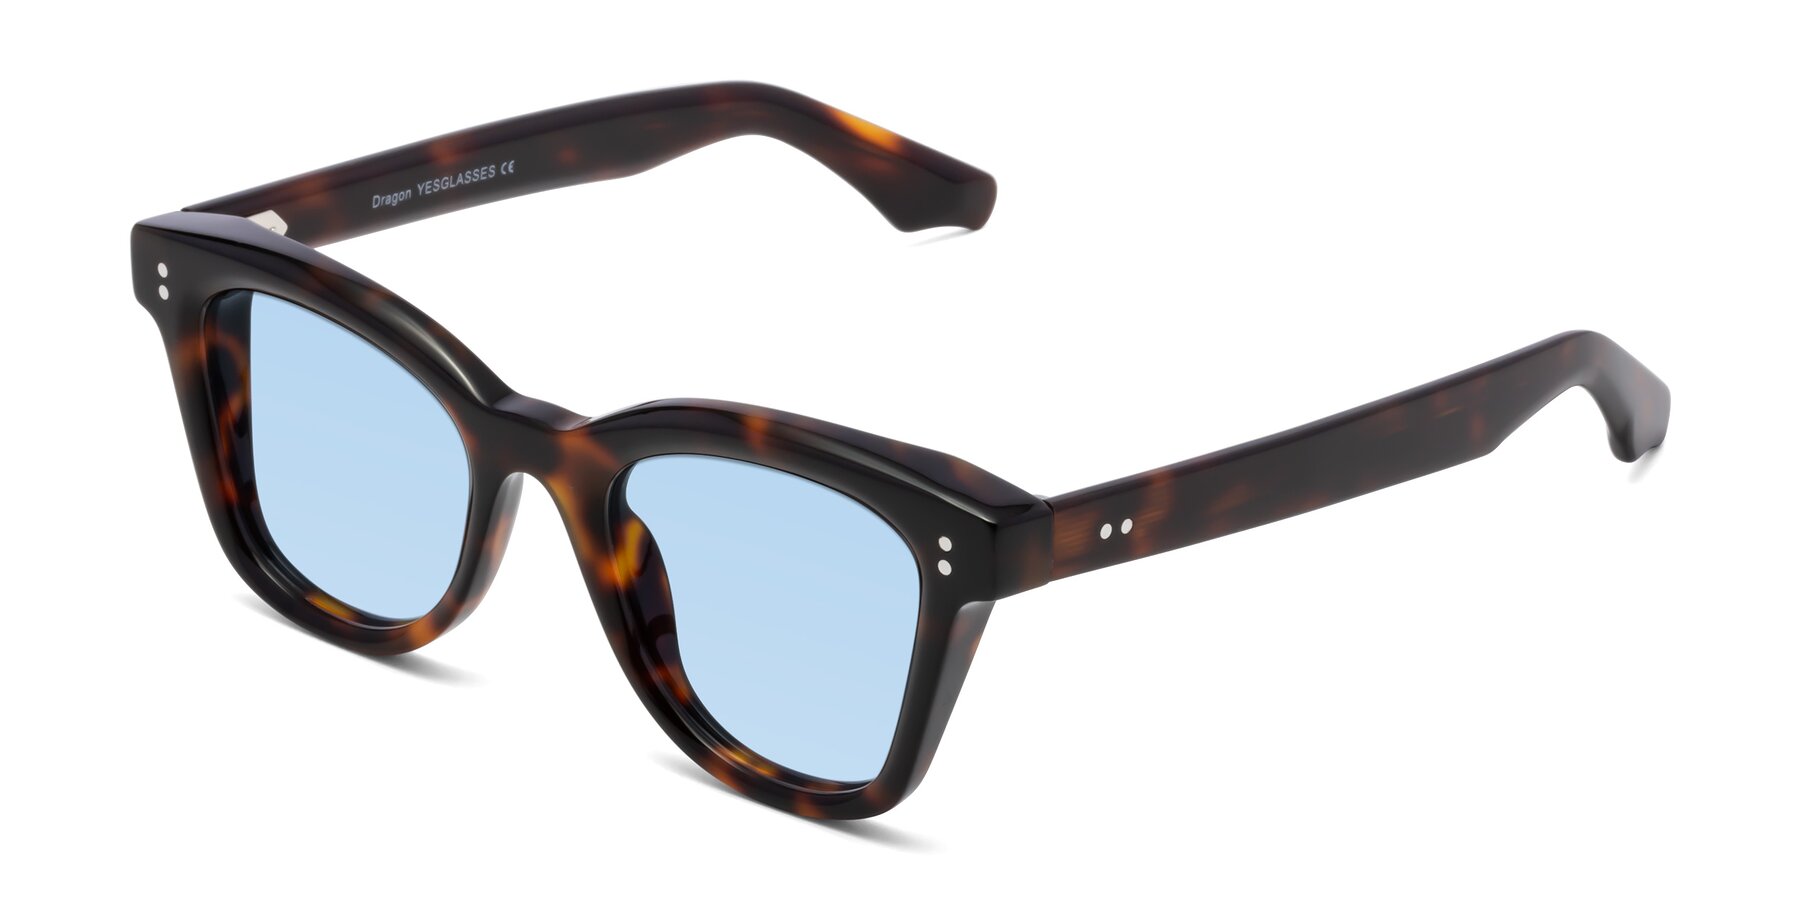 Angle of Dragon in Tortoise with Light Blue Tinted Lenses